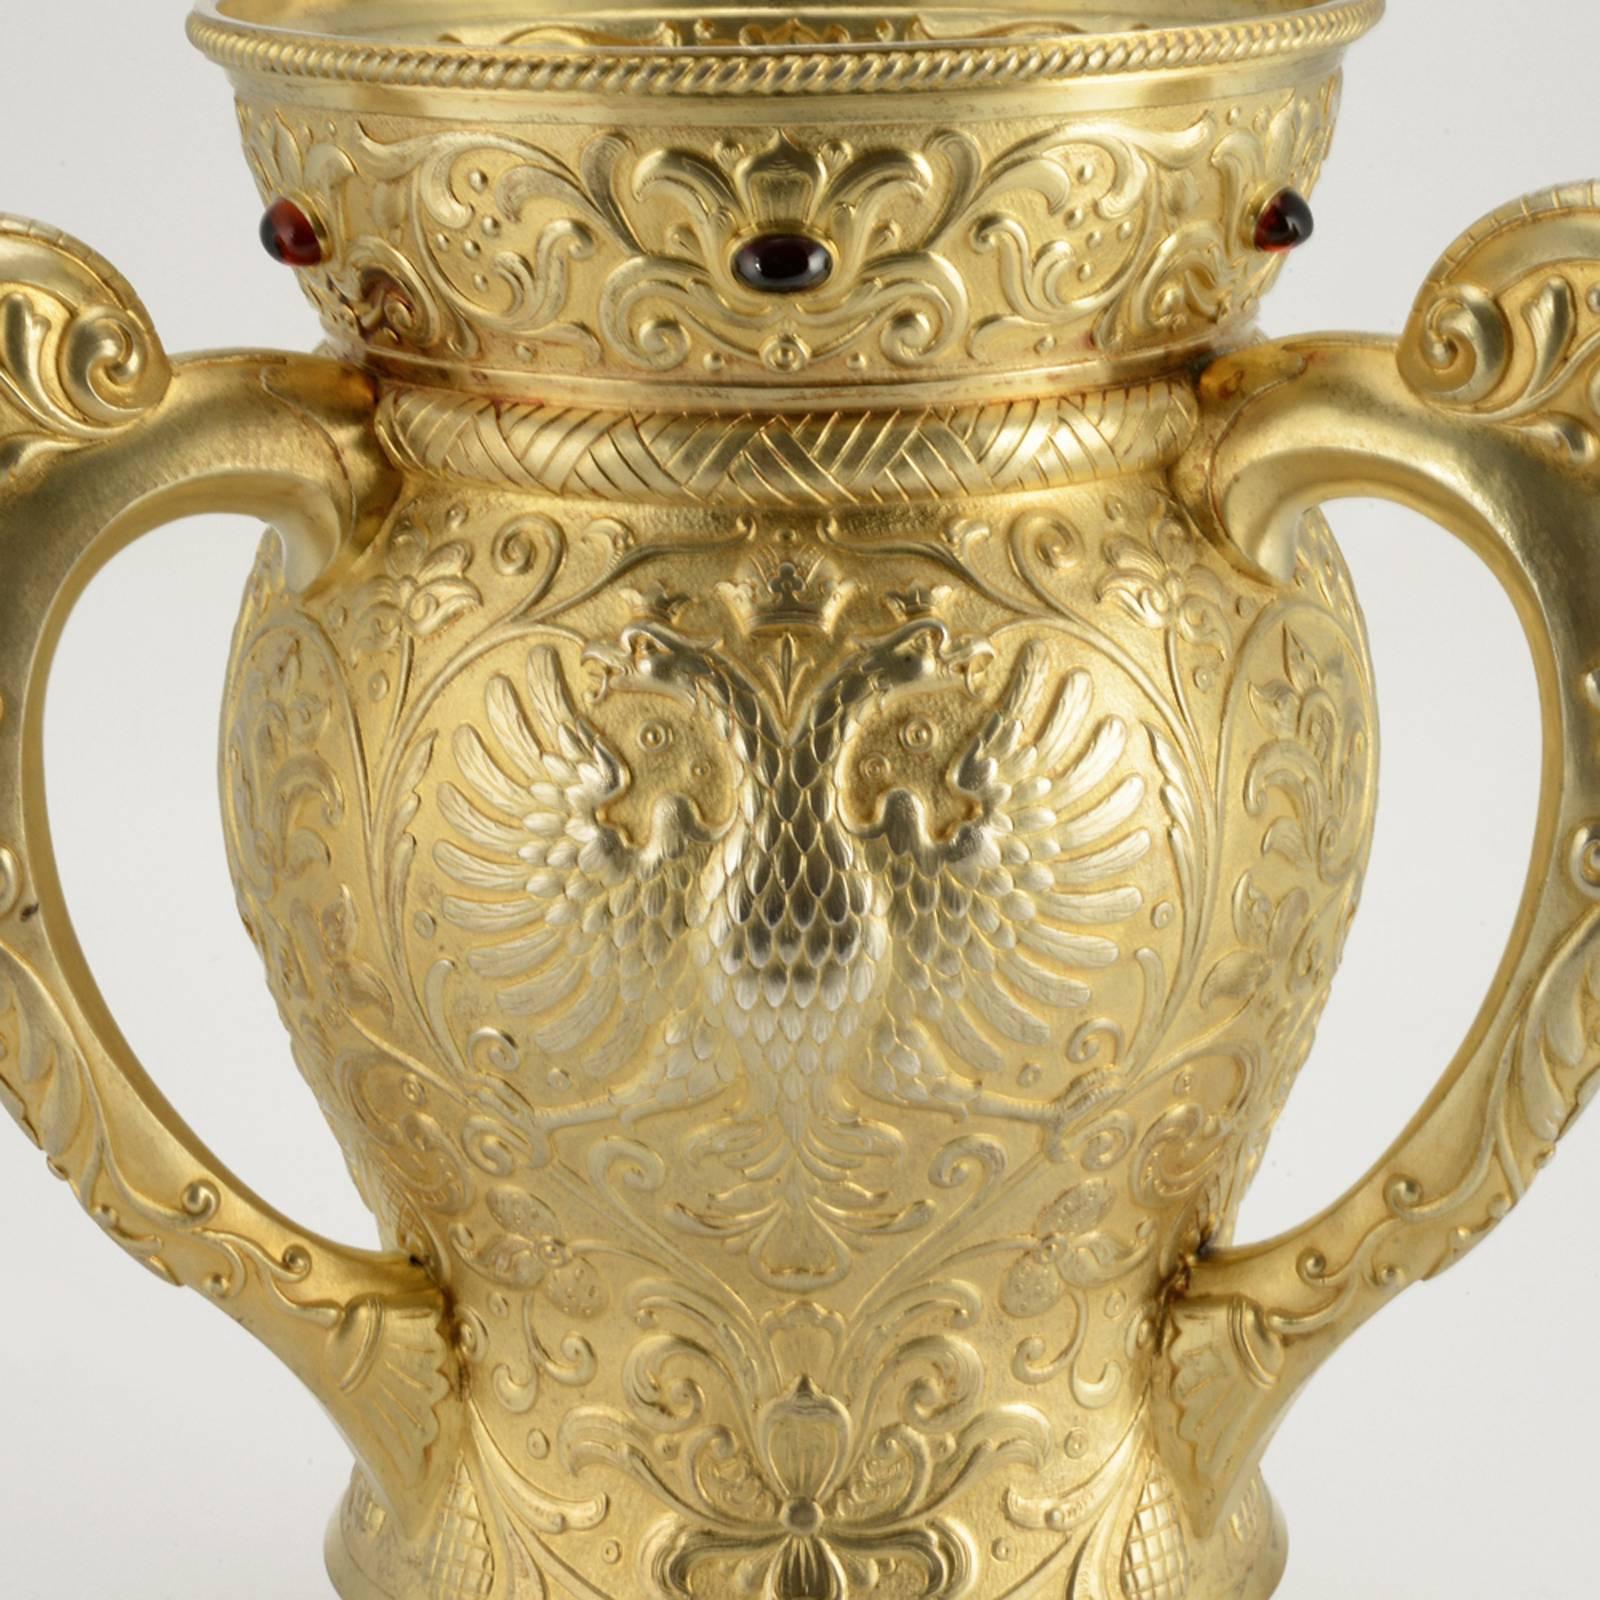 Revival 19th Century Russian Imperial Gem-Set Gilded Silver Trophy Cup by Ovchinnikov